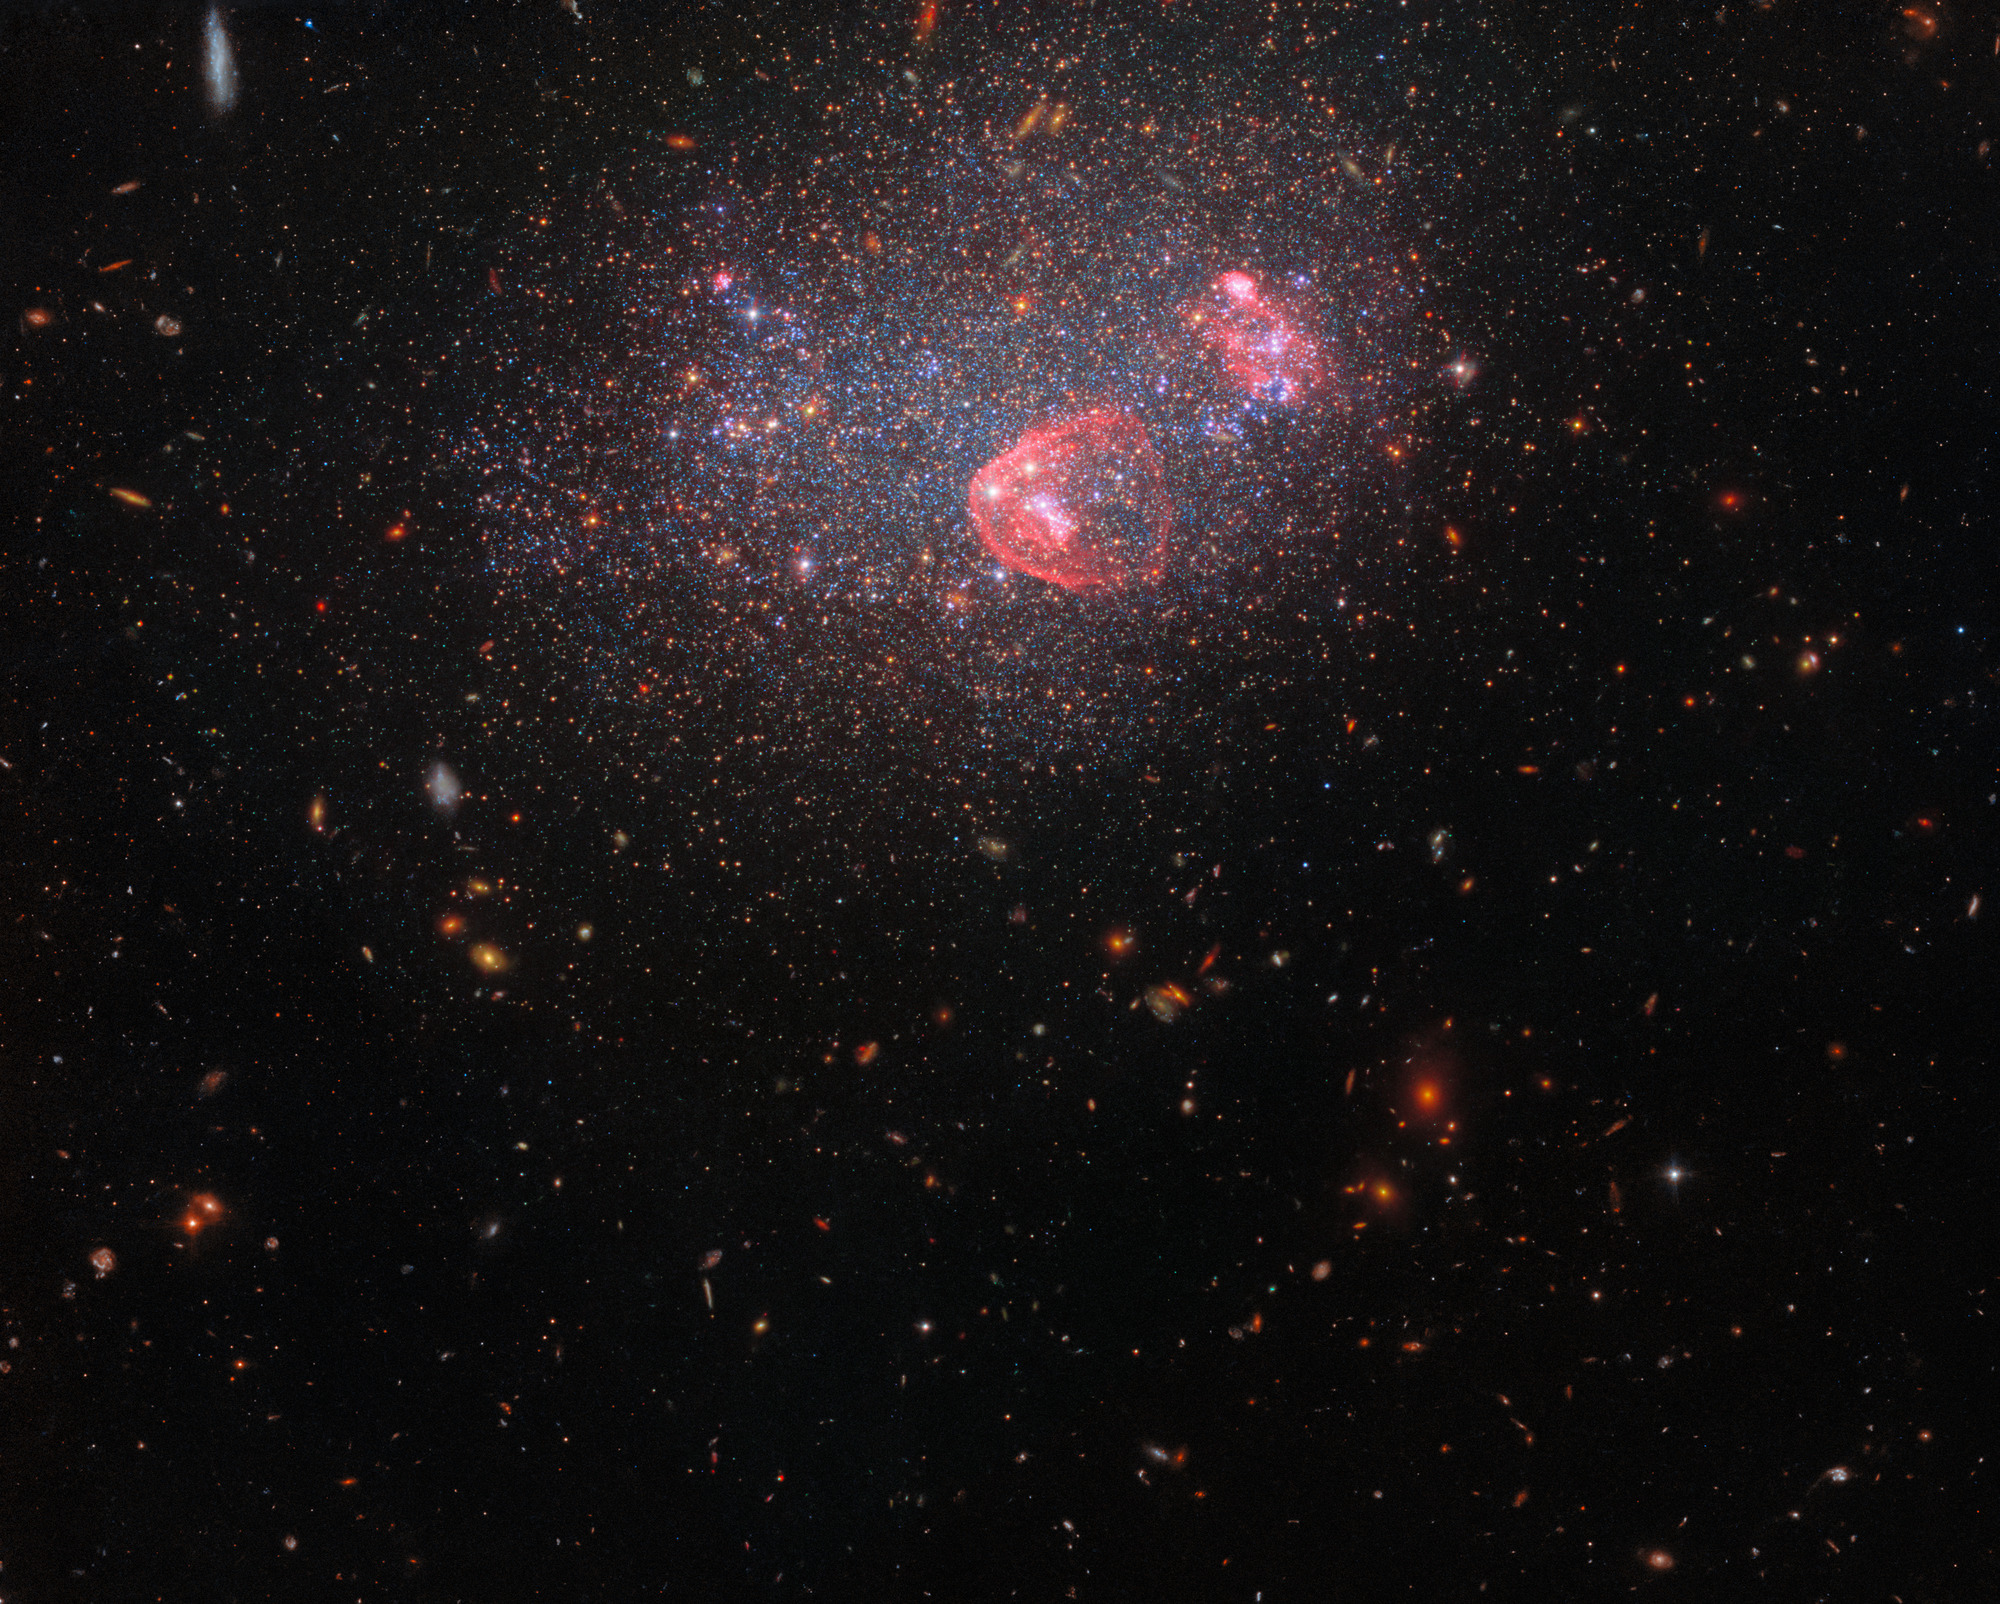 A field of galaxies. UGC 8091 is at the top and center of the image. It appears as a haze of stars through which more distant galaxies are visible. Two, bright, pinkish-red nebulae are also visible.